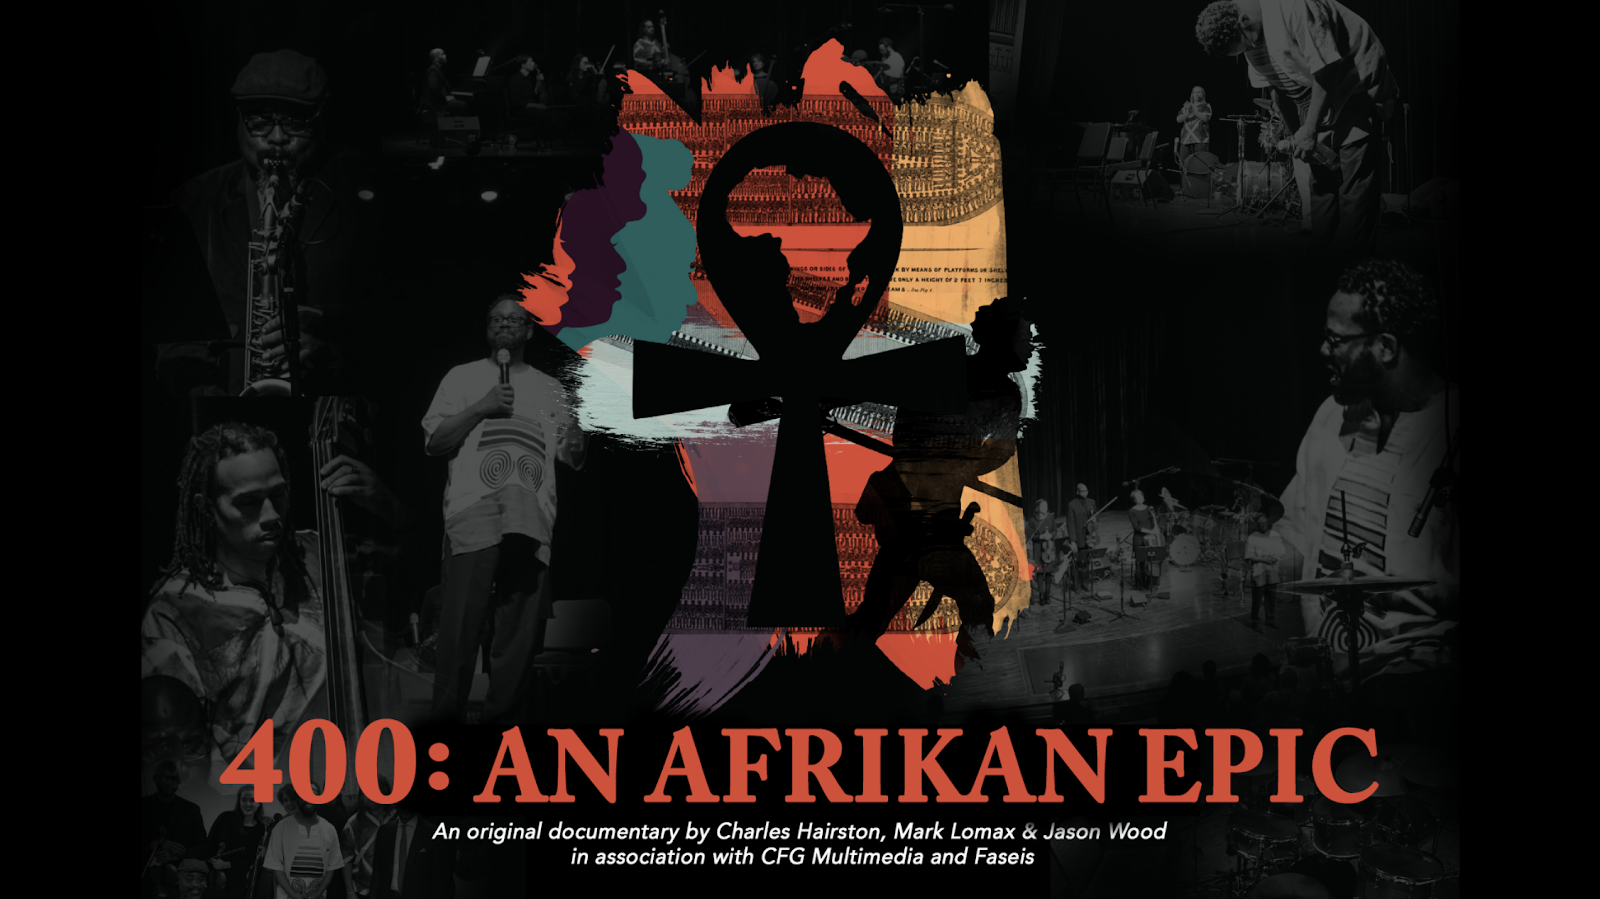 Click on Image to purchase or rent the 400: An Afrikan Epic Documentary! 